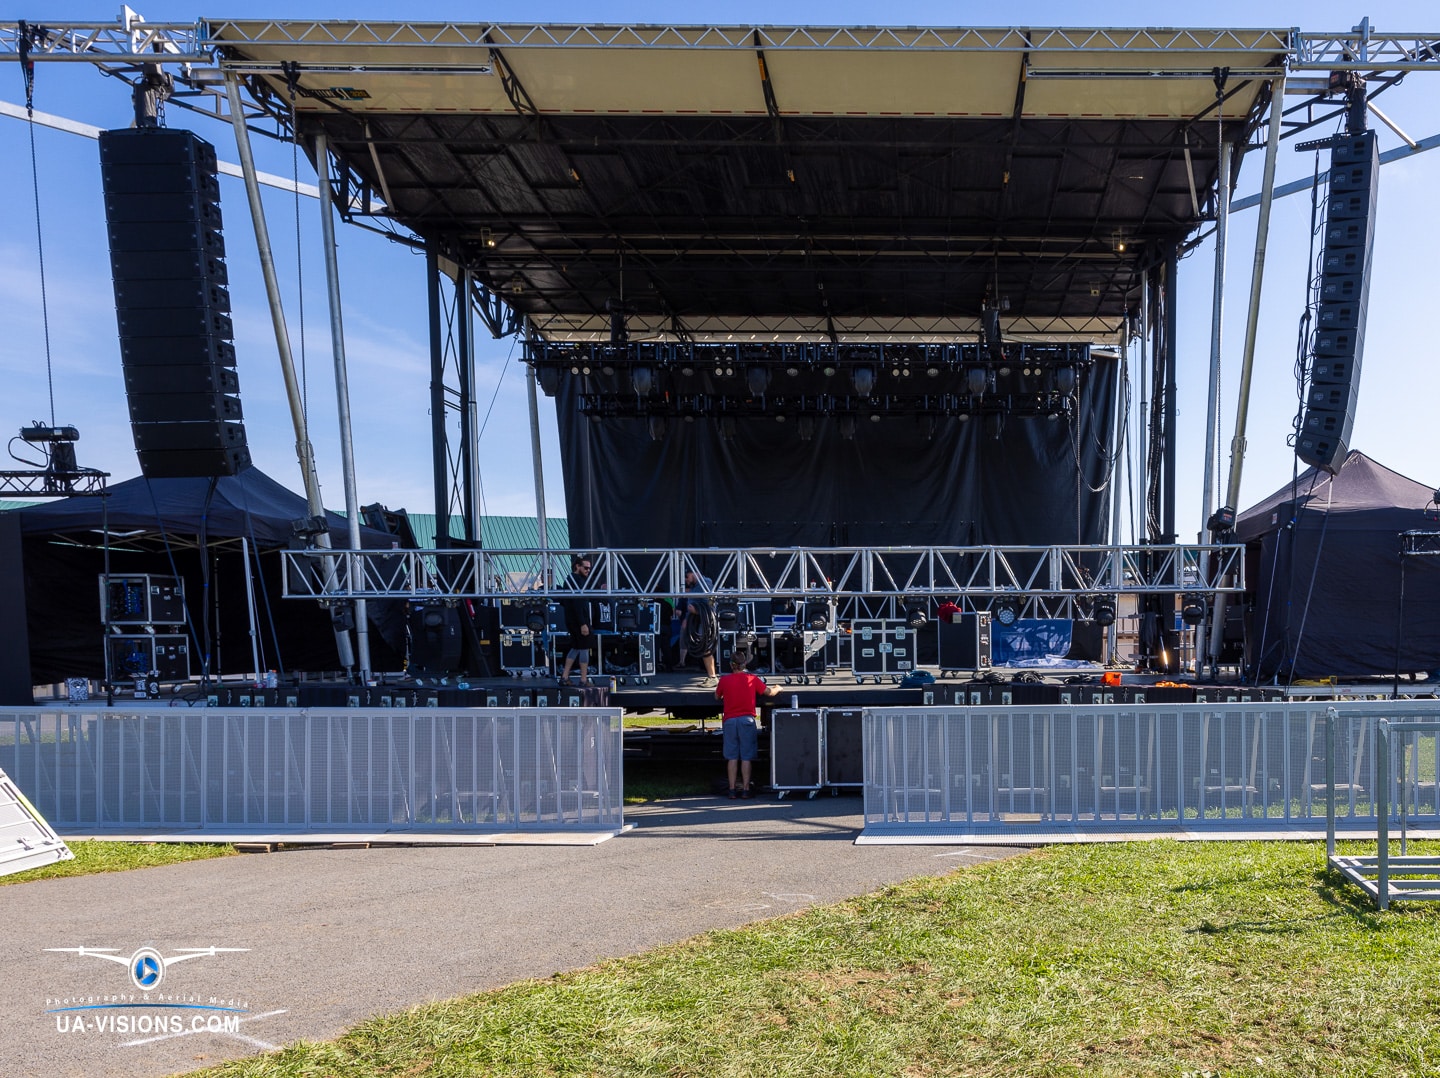 Close-up of outdoor concert stage with black drapes and professional audio equipment.